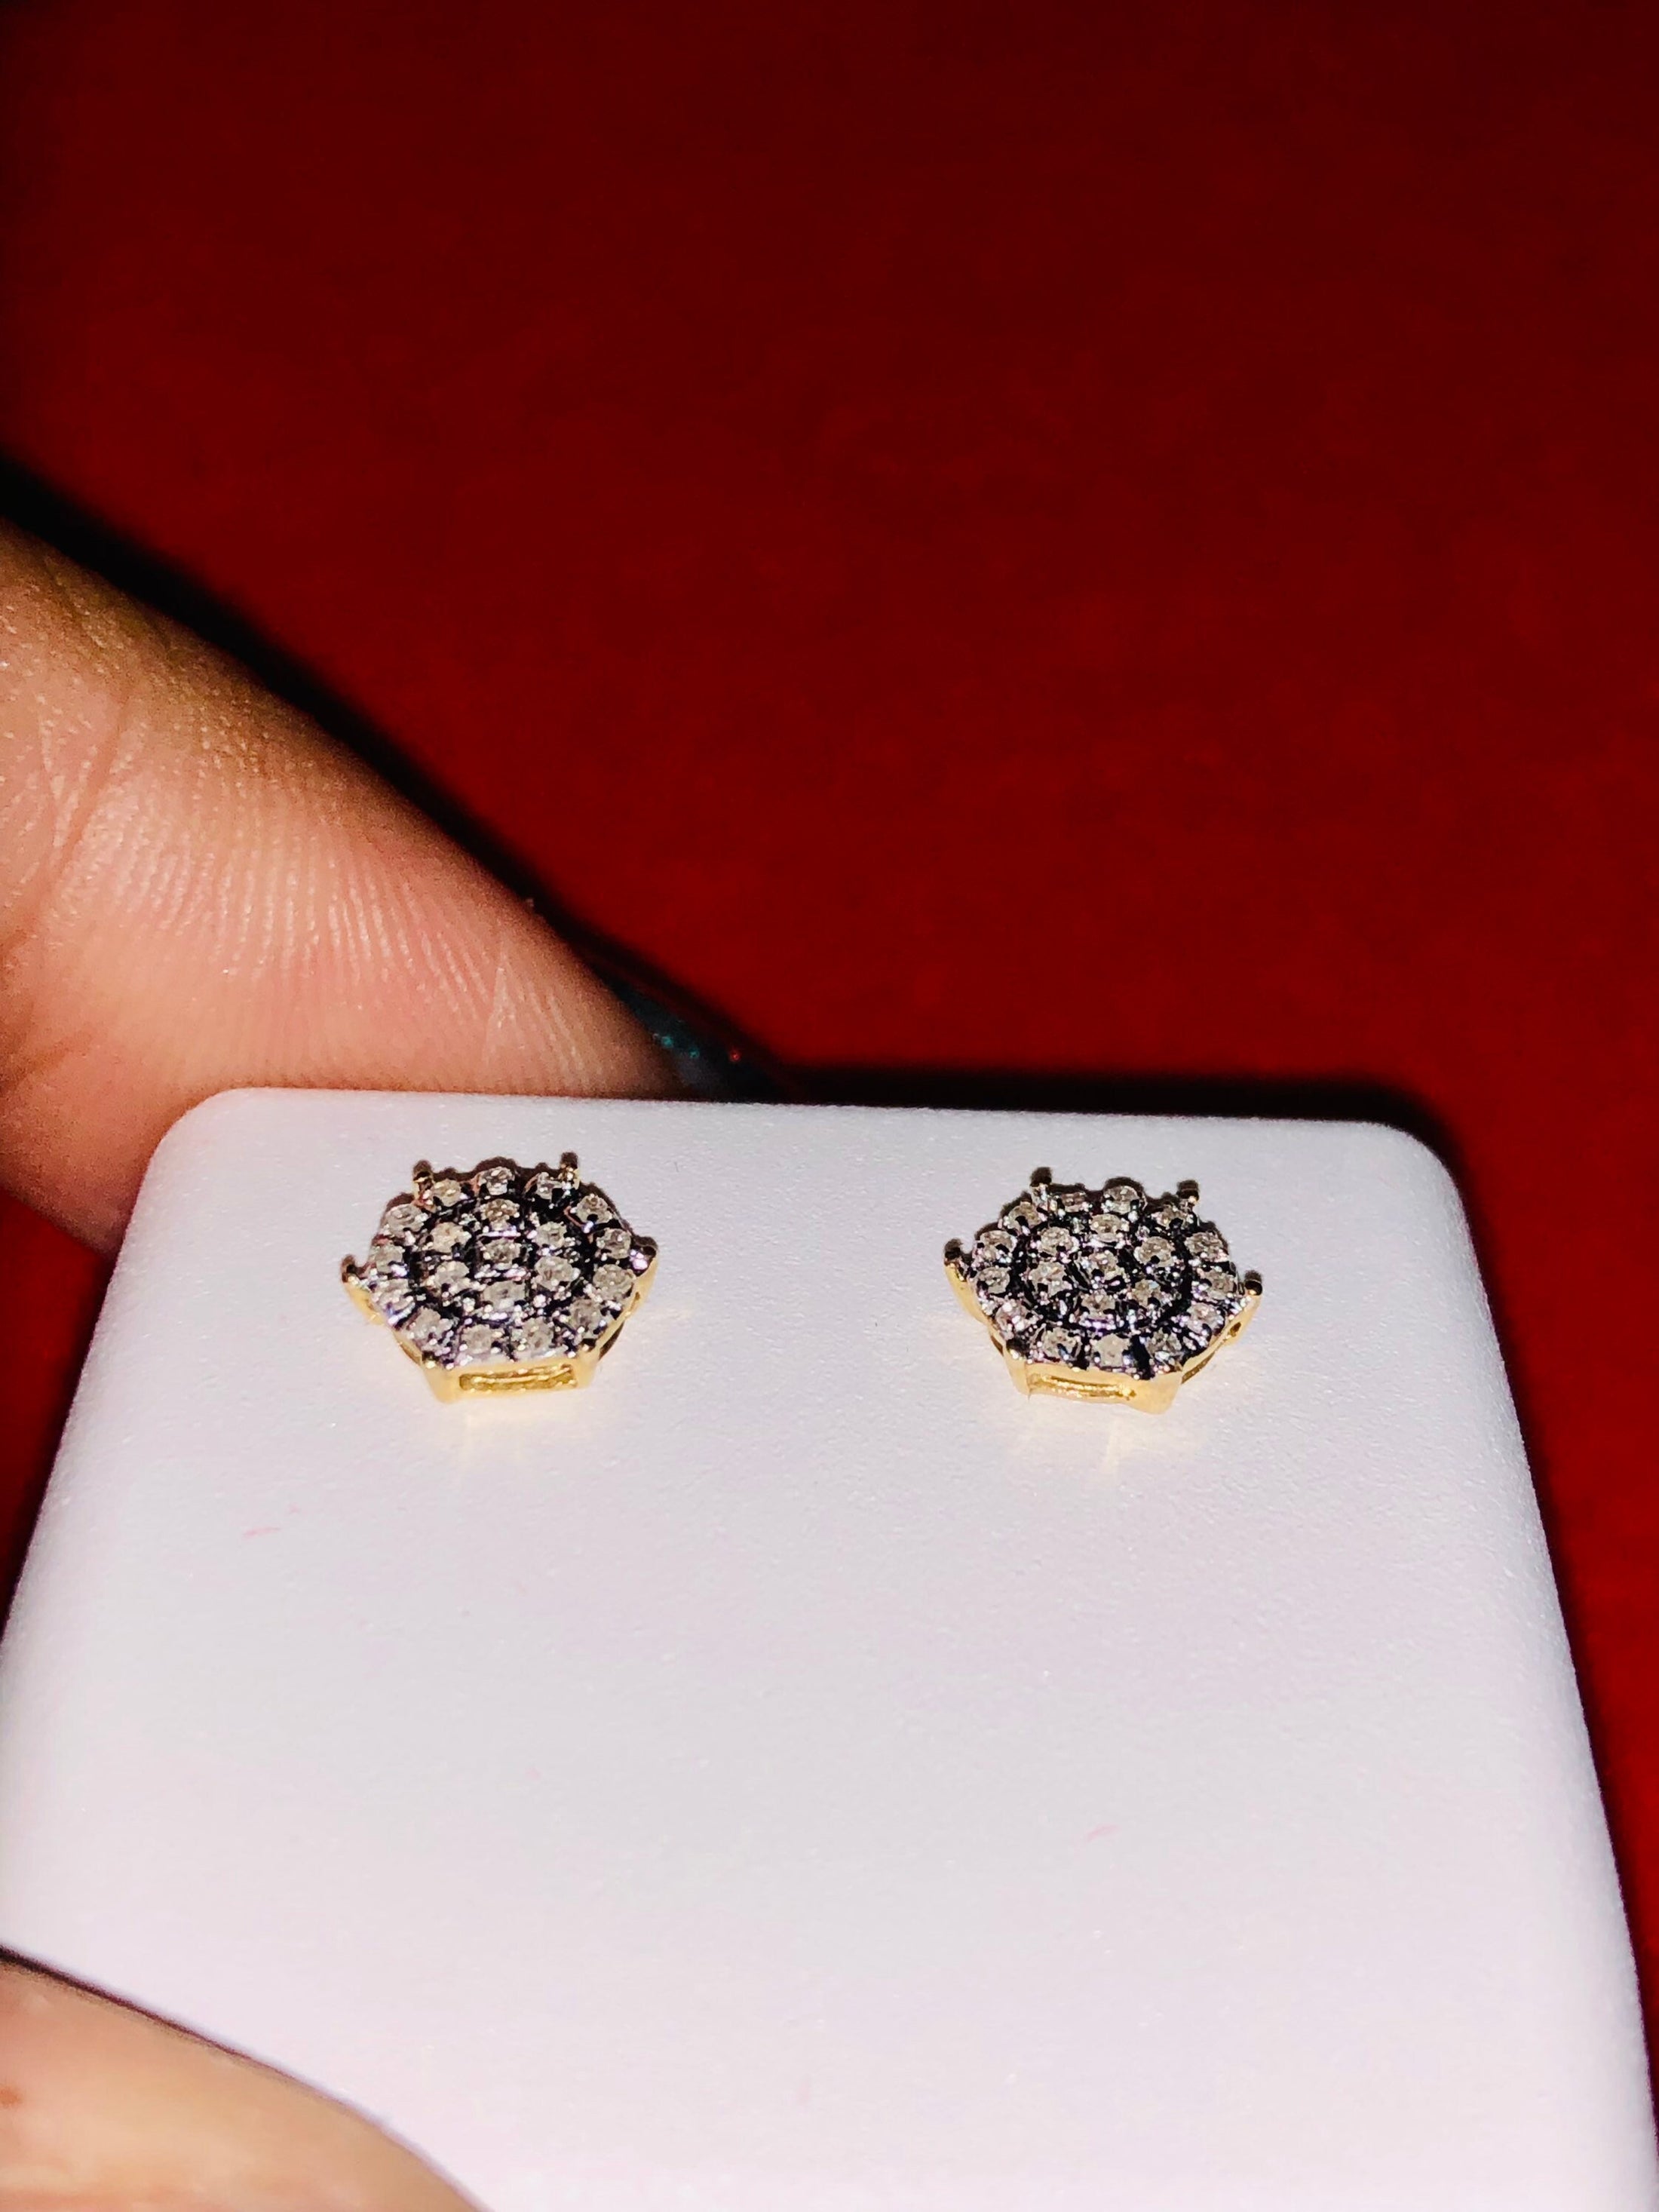 10k solid real gold real genuine natural diamond earrings, not plated not lab made, Free Appraisal, unisex, huge sale, best gift